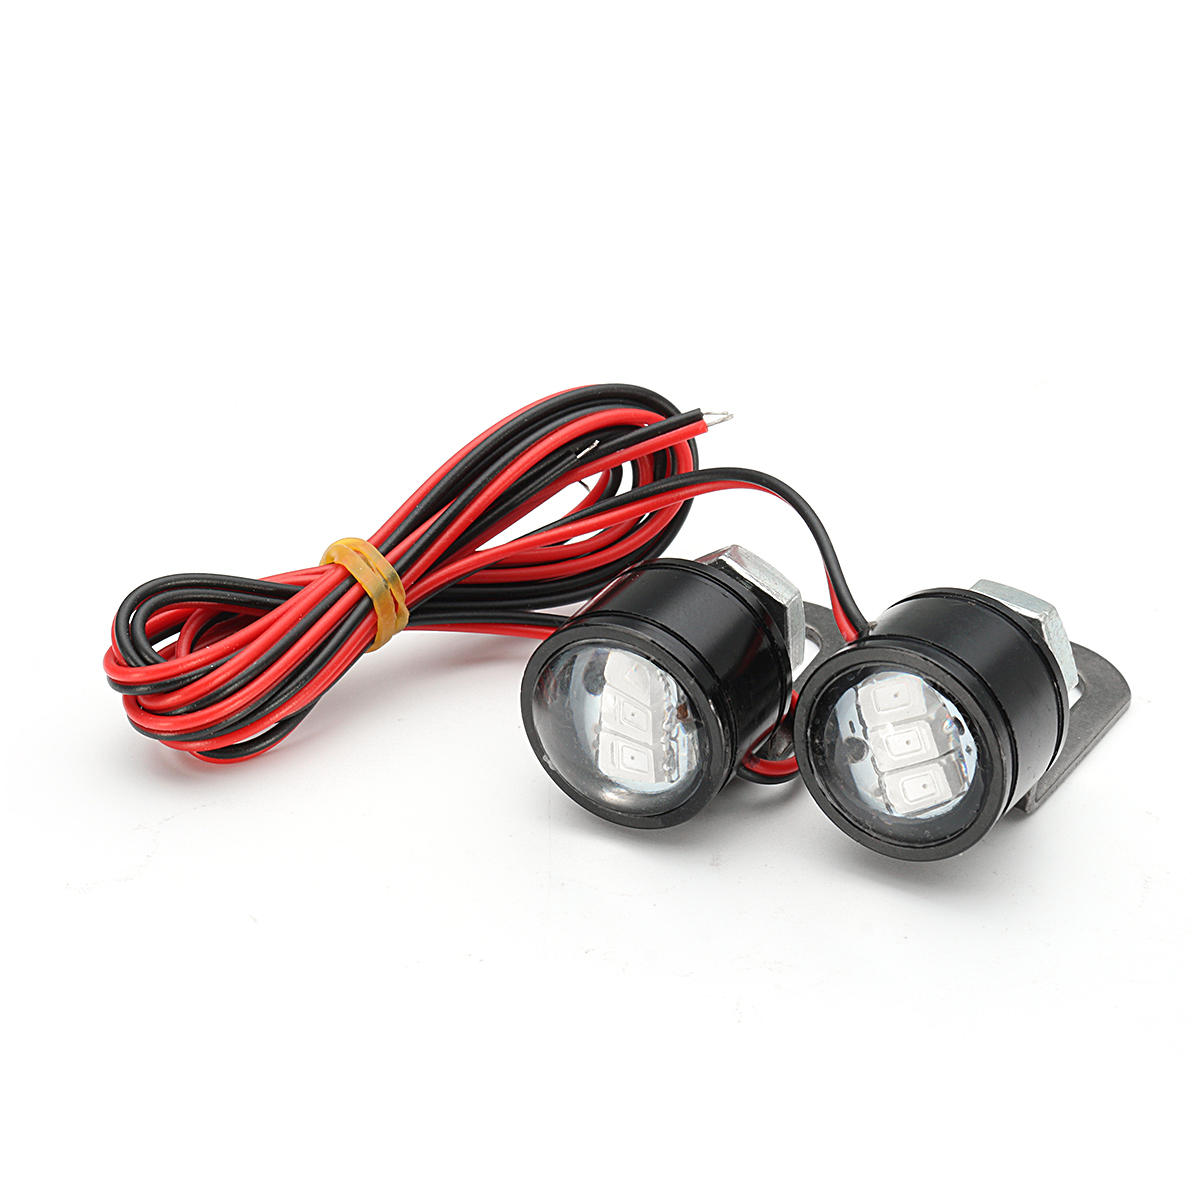 Motorcycle LED Constant Mirror Mount Eagle Eye Lamp Light